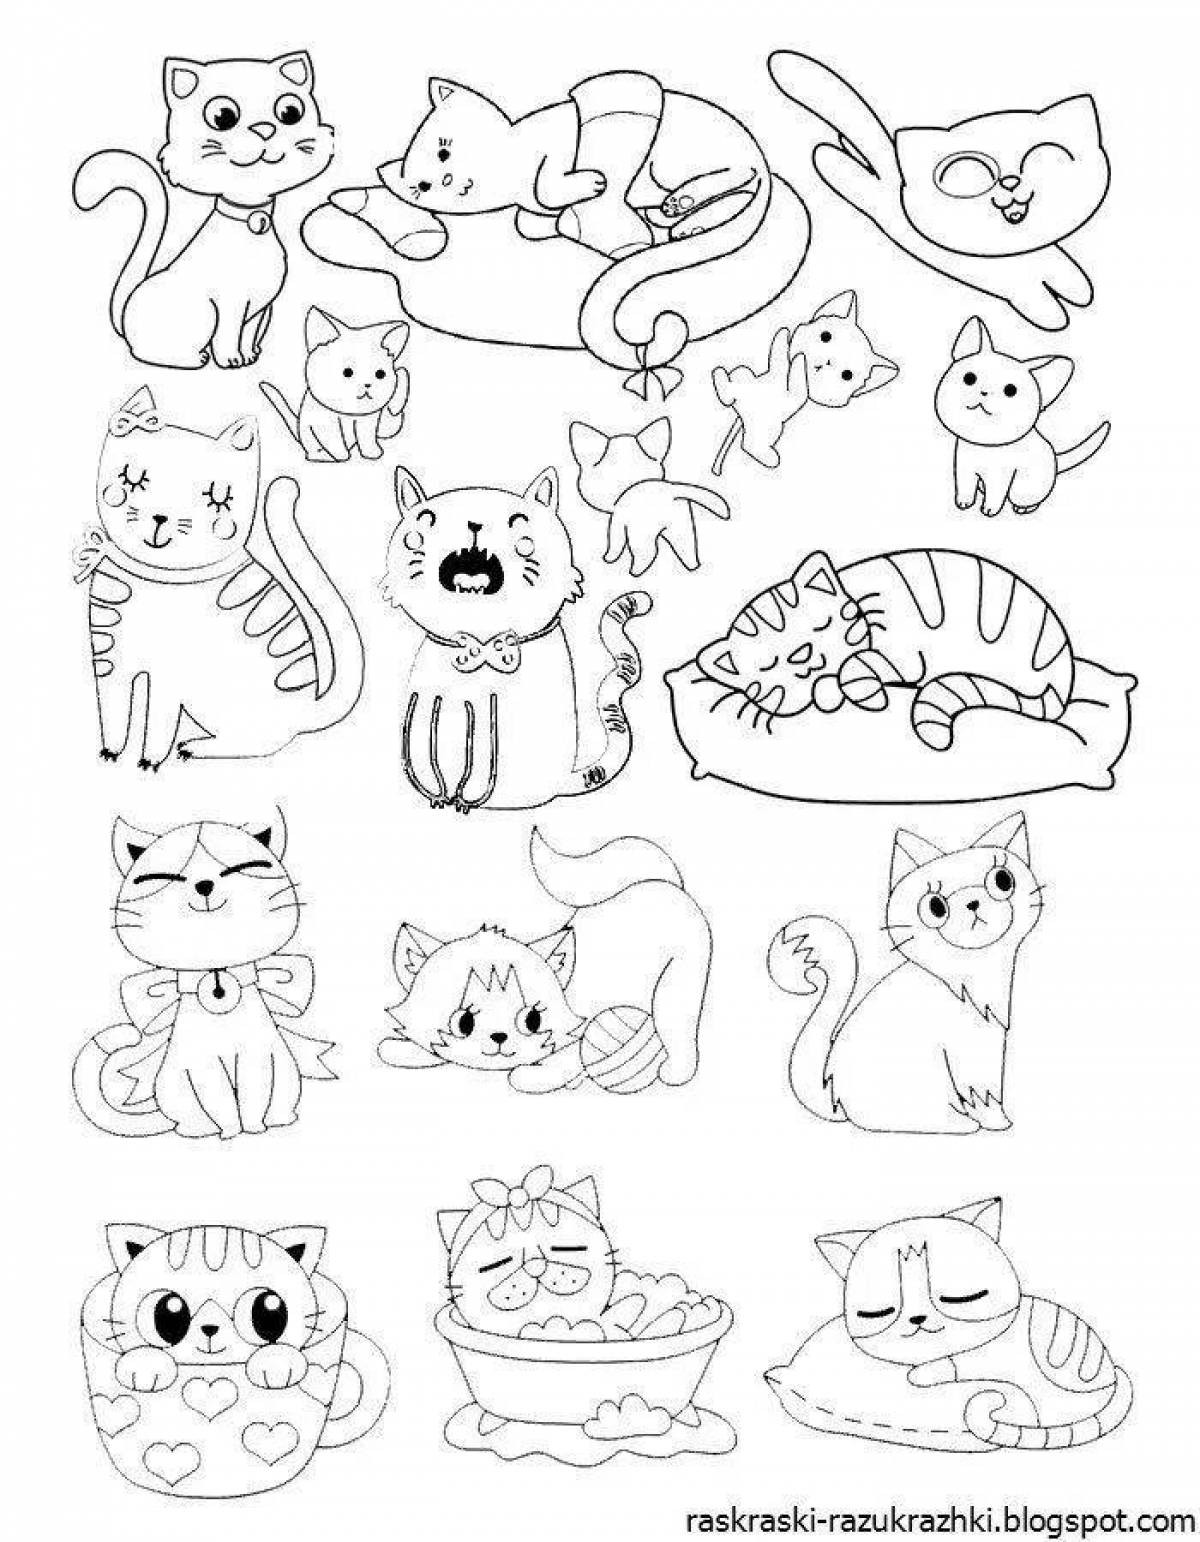 Coloring page gentle kittens